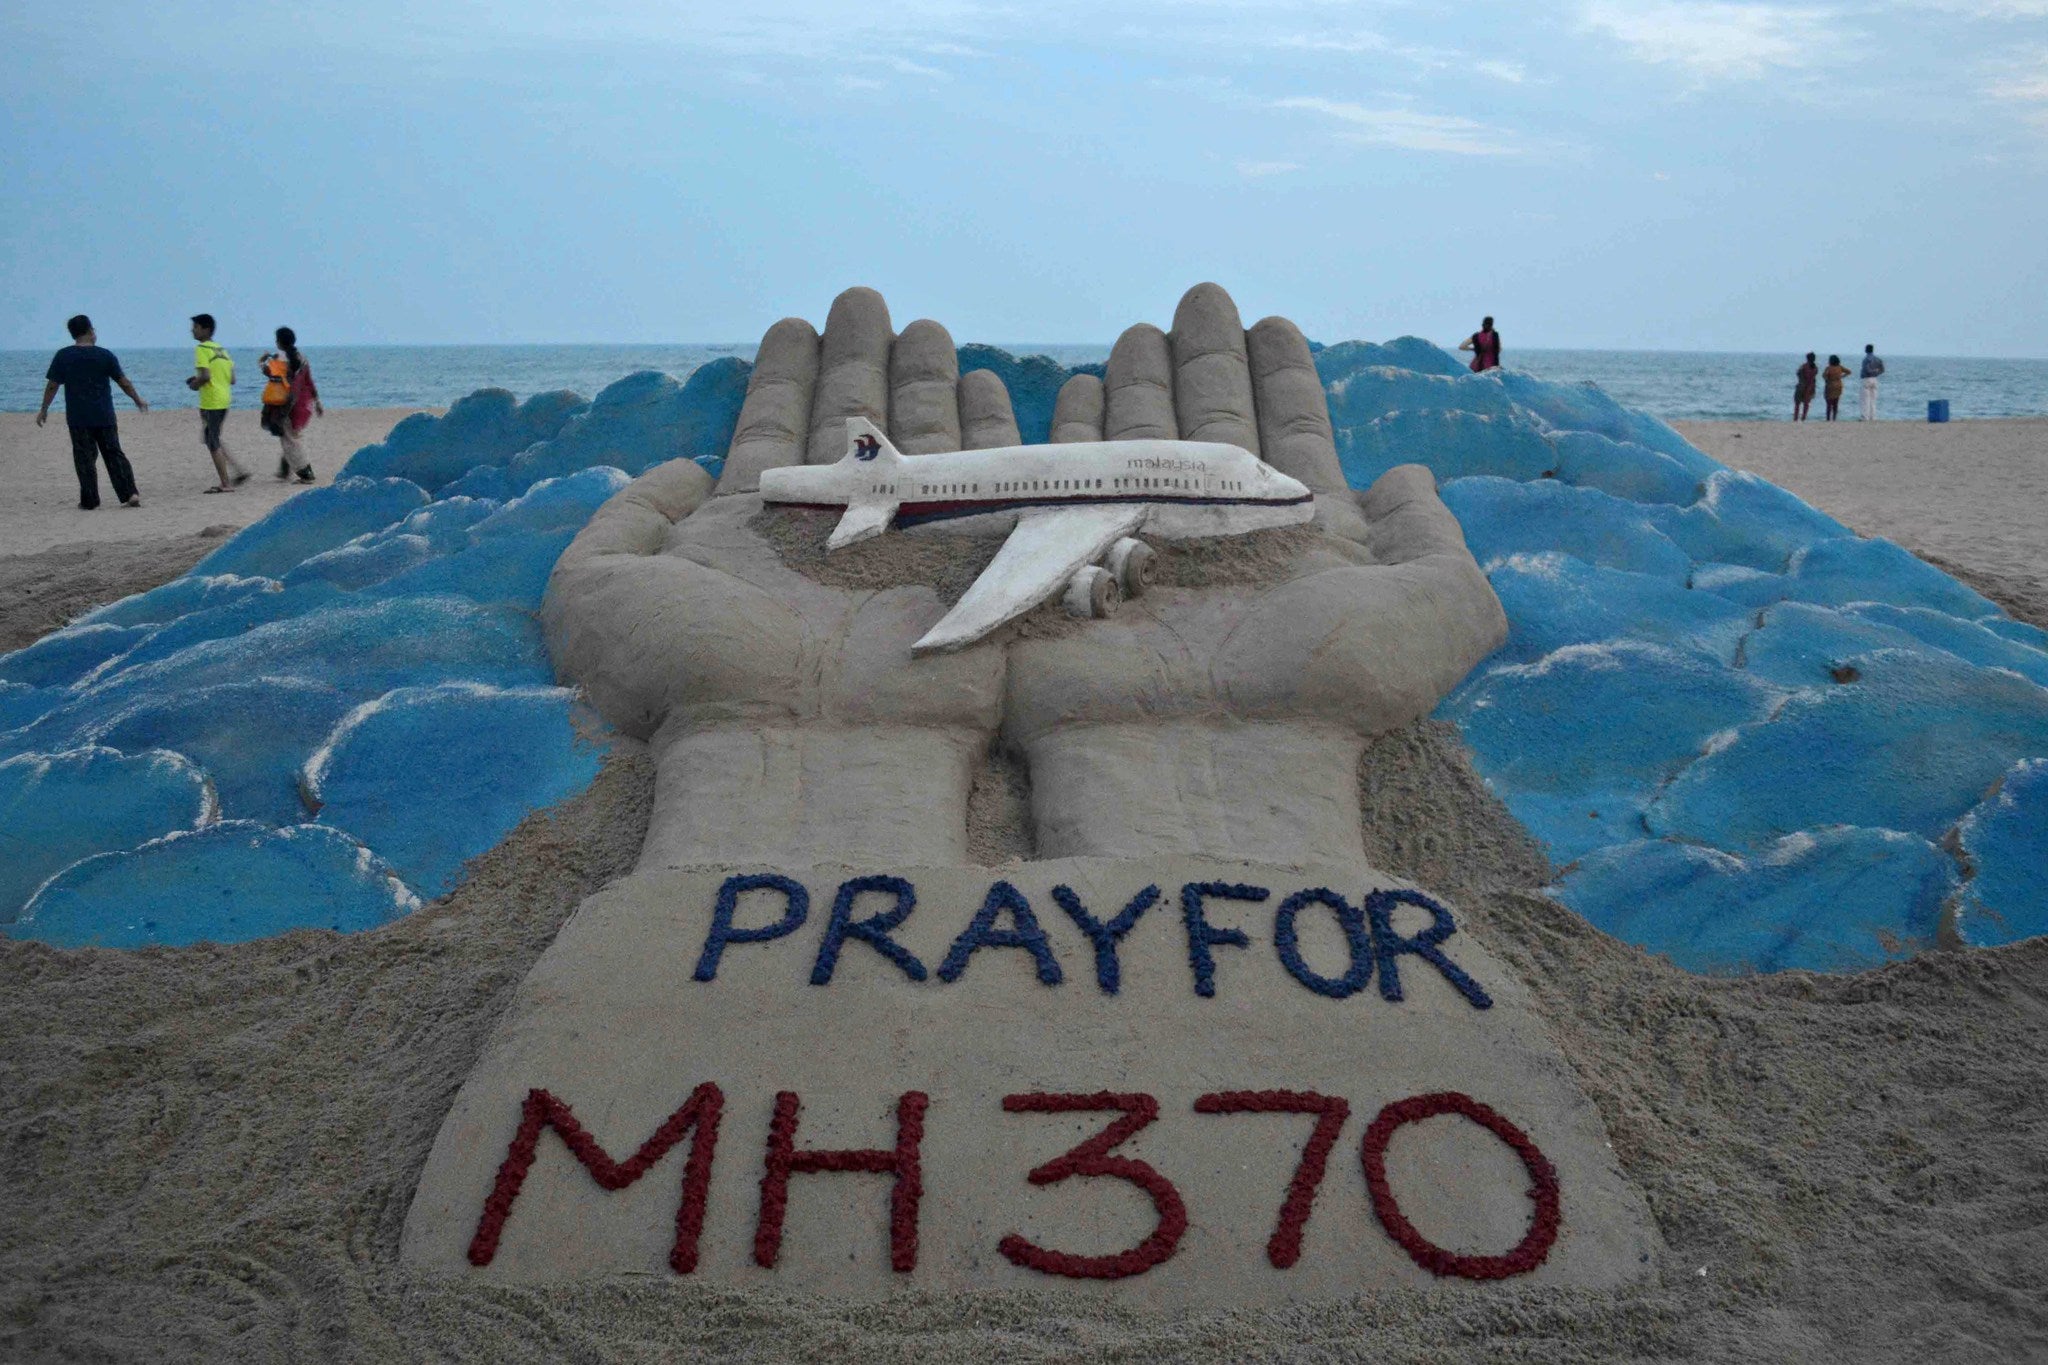 £20,000 has been stolen from the bank accounts of four passengers from missing flight MH370, Malaysian police say